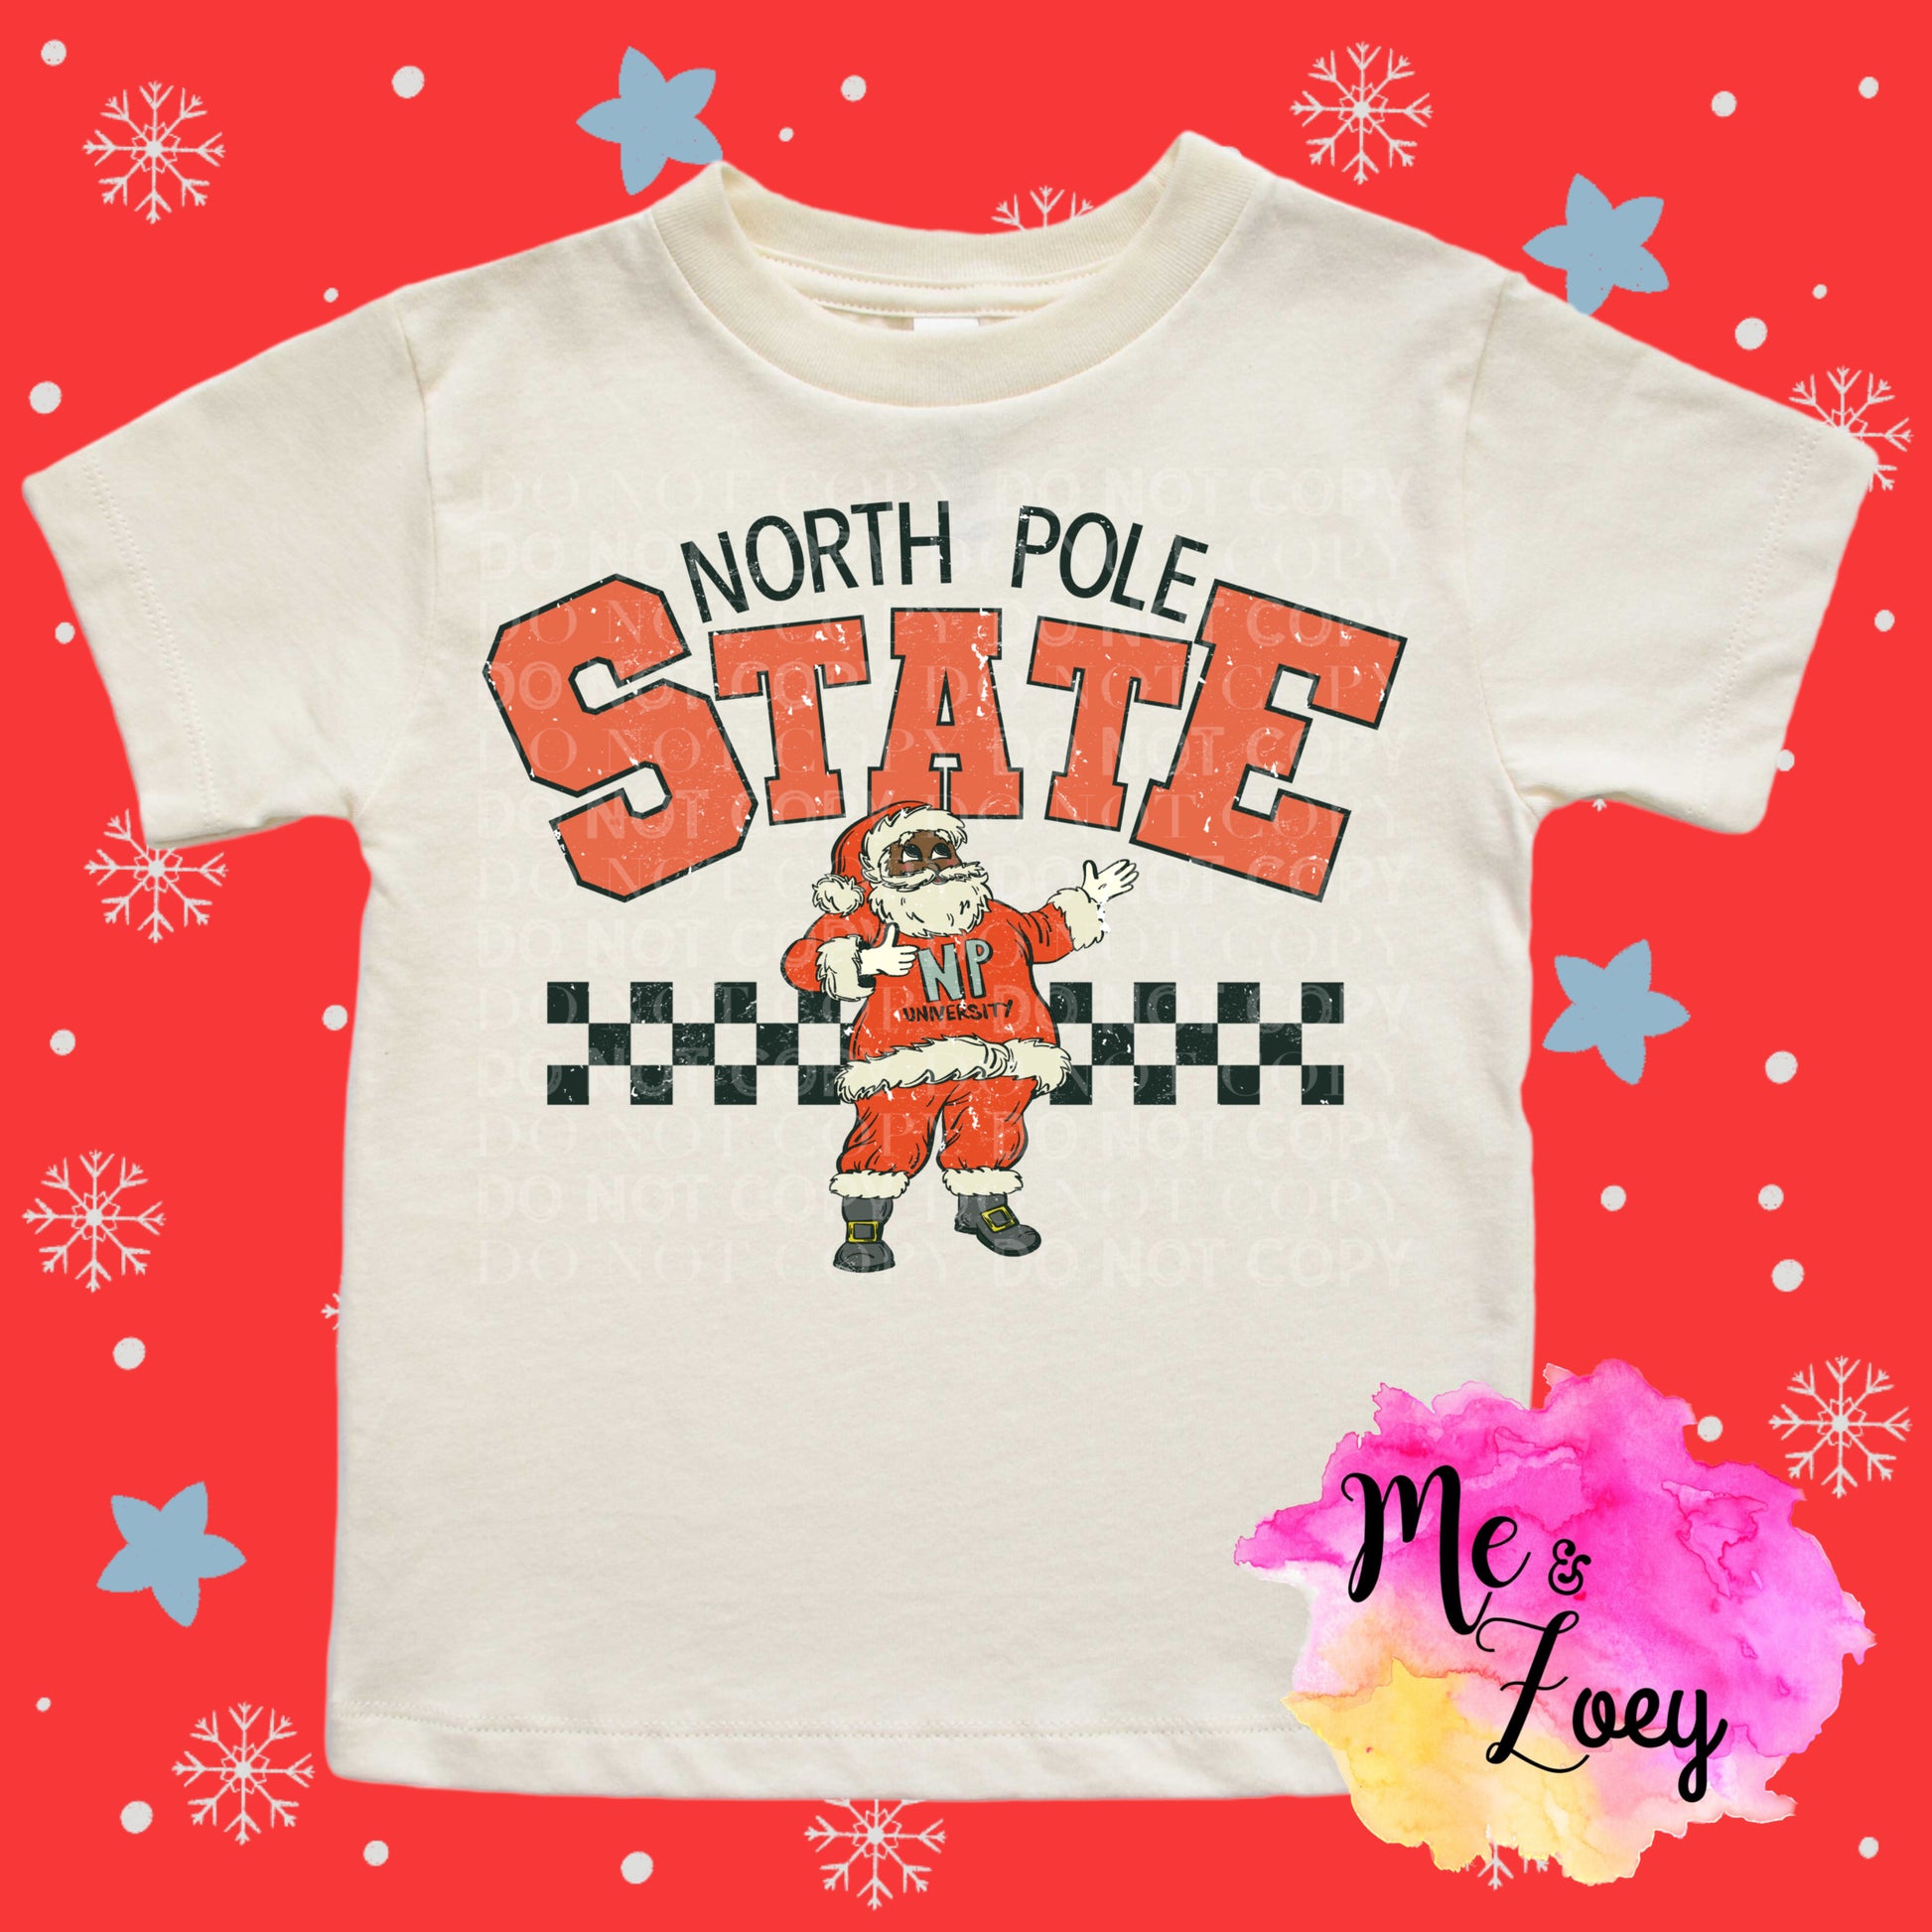 North Pole State Graphic Tee - MeAndZoey